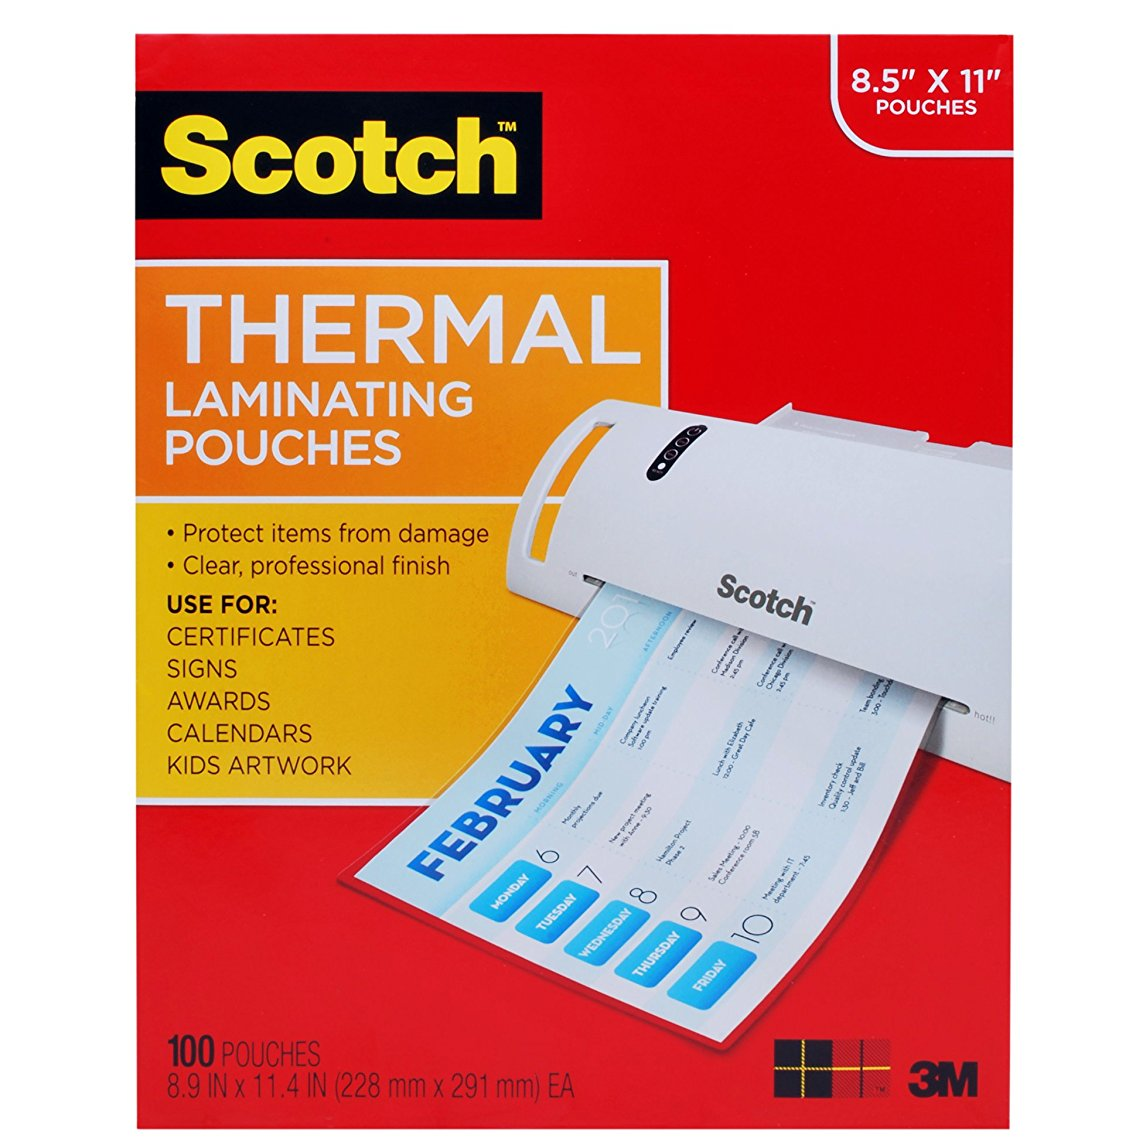 Scotch Thermal Laminating Pouches 100 Pack Only $11.70! (Reg $24)